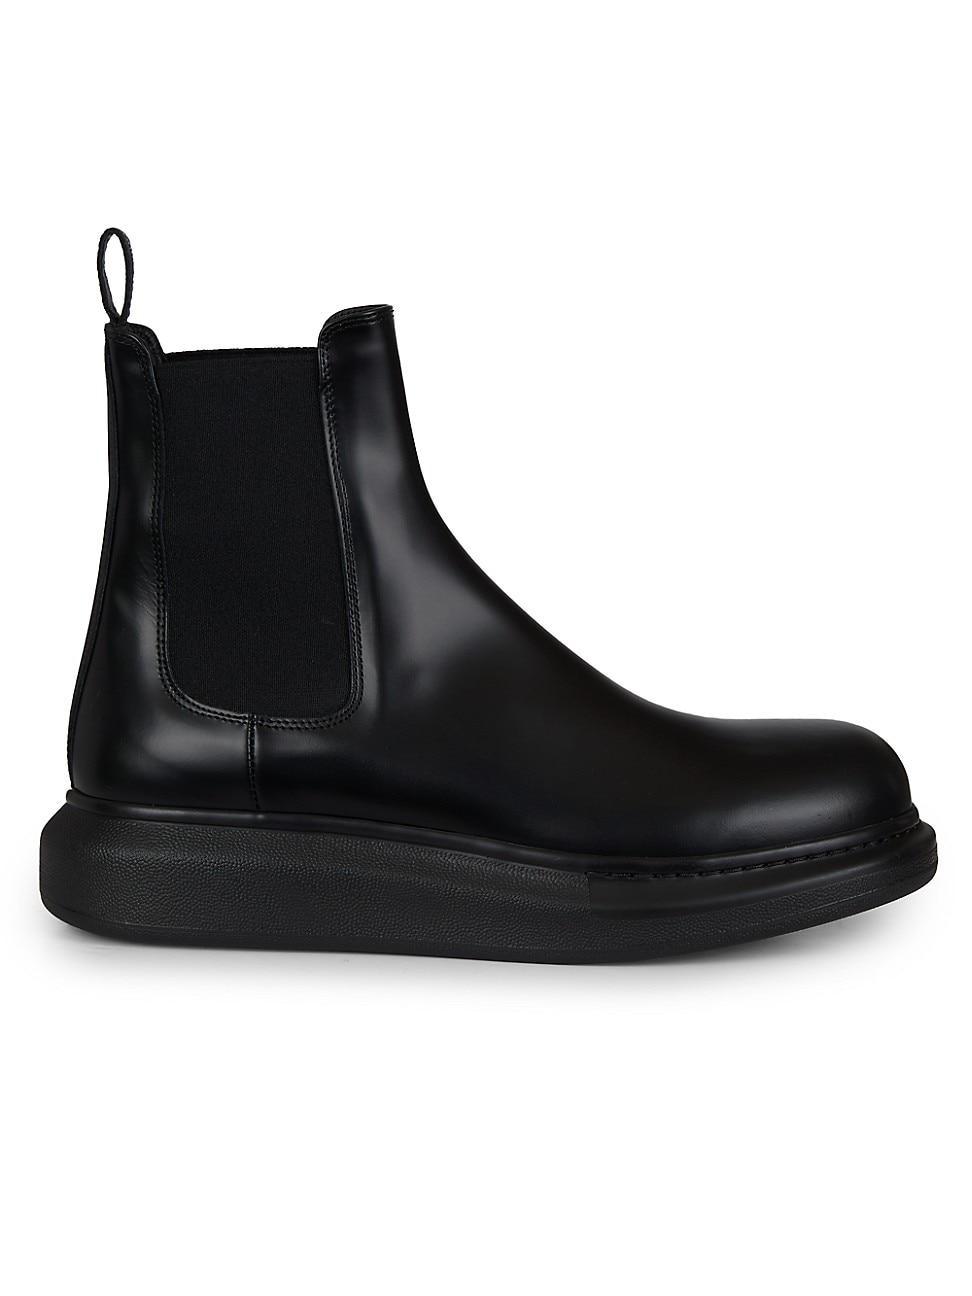 Mens Platform Leather Chelsea Boots Product Image